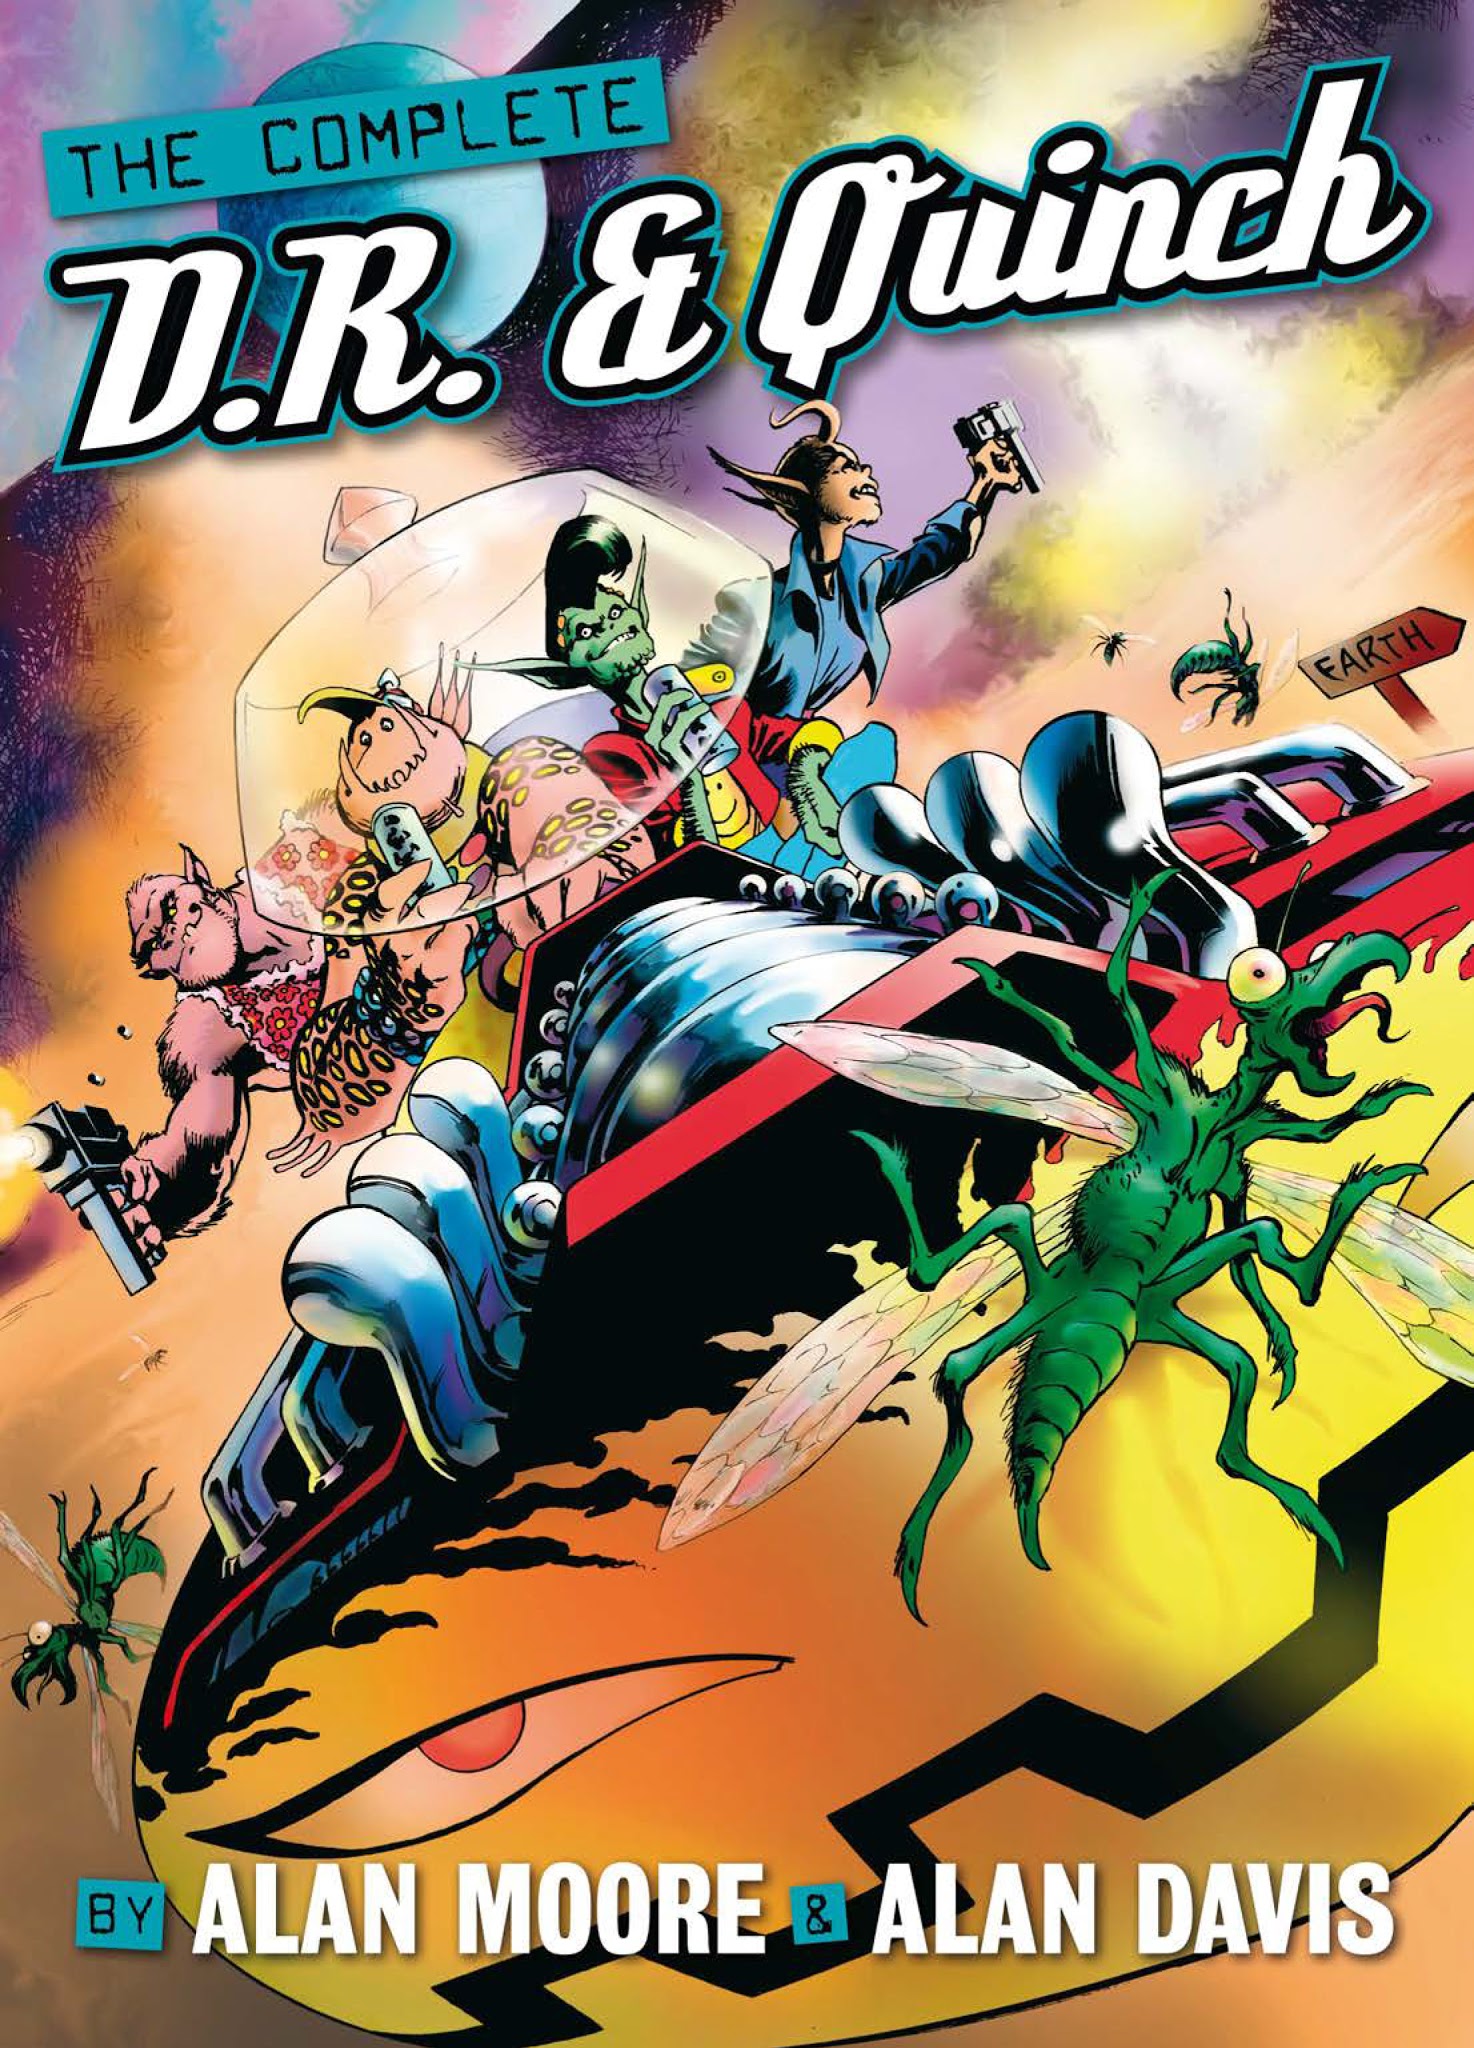 Read online The Complete D.R. & Quinch comic -  Issue # TPB - 1